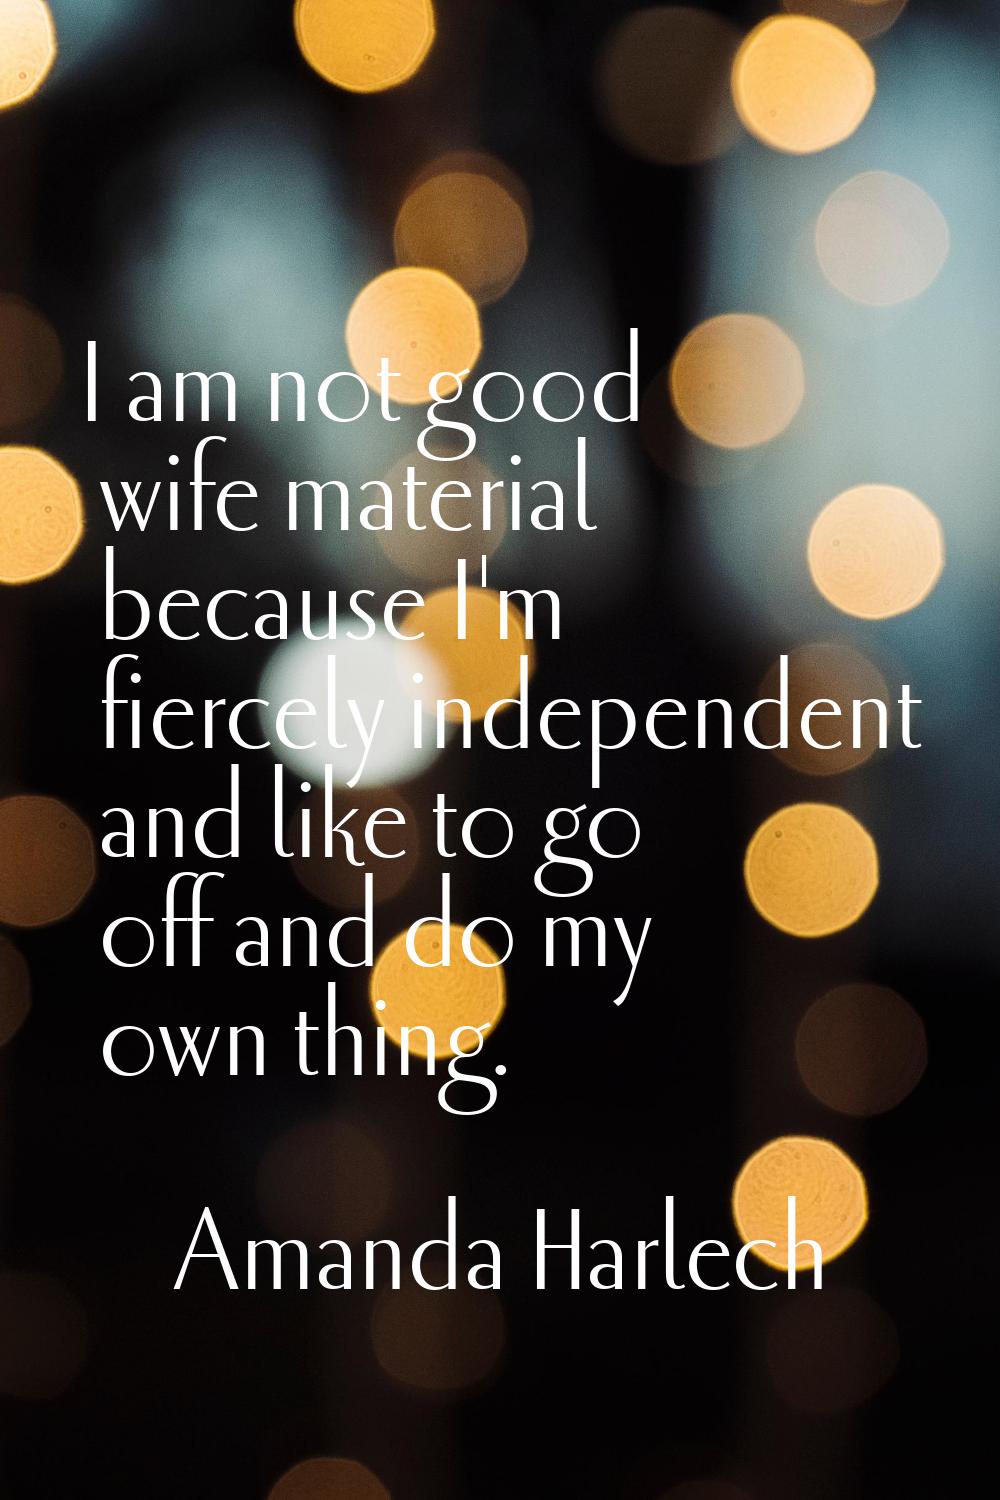 I am not good wife material because I'm fiercely independent and like to go off and do my own thing